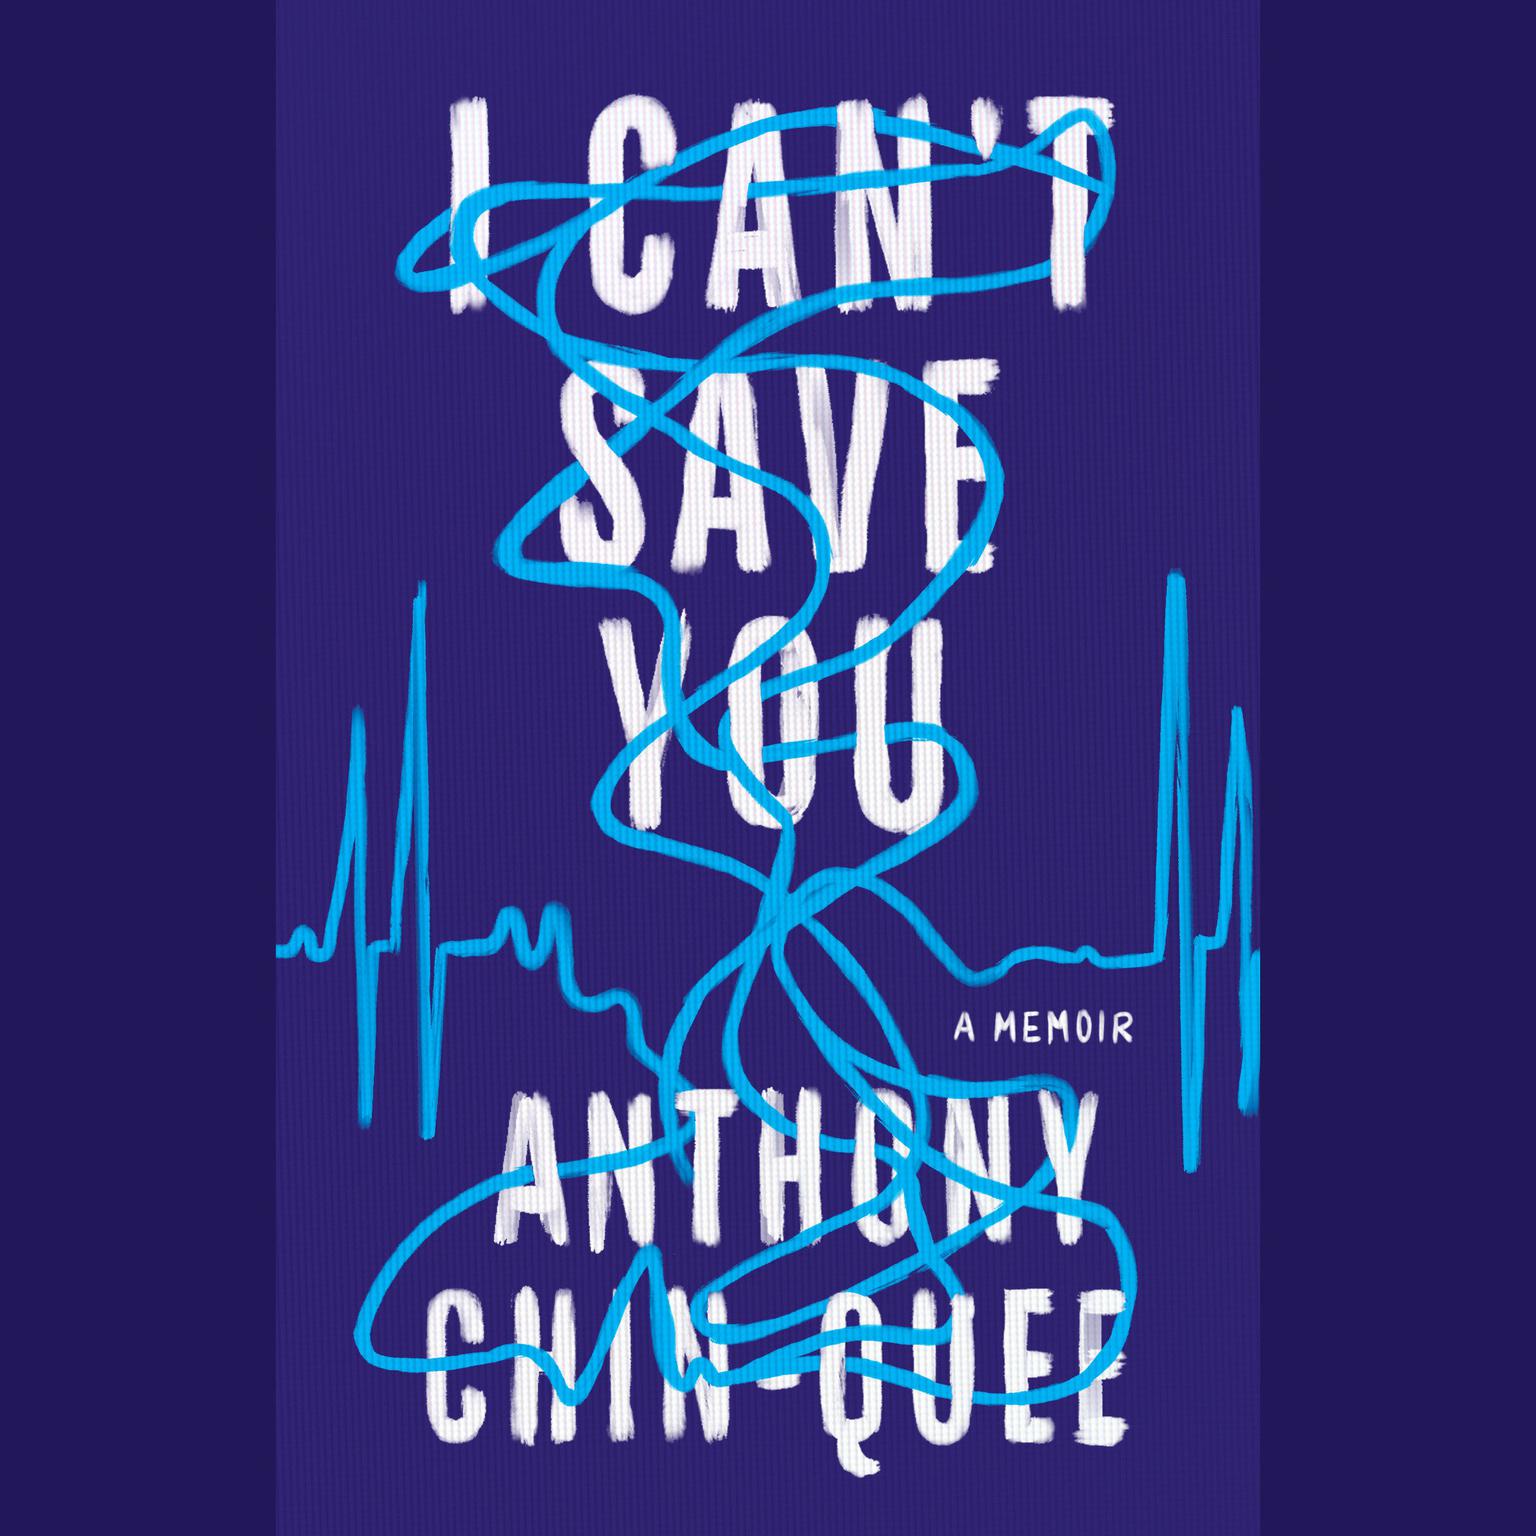 I Cant Save You: A Memoir Audiobook, by Anthony Chin-Quee